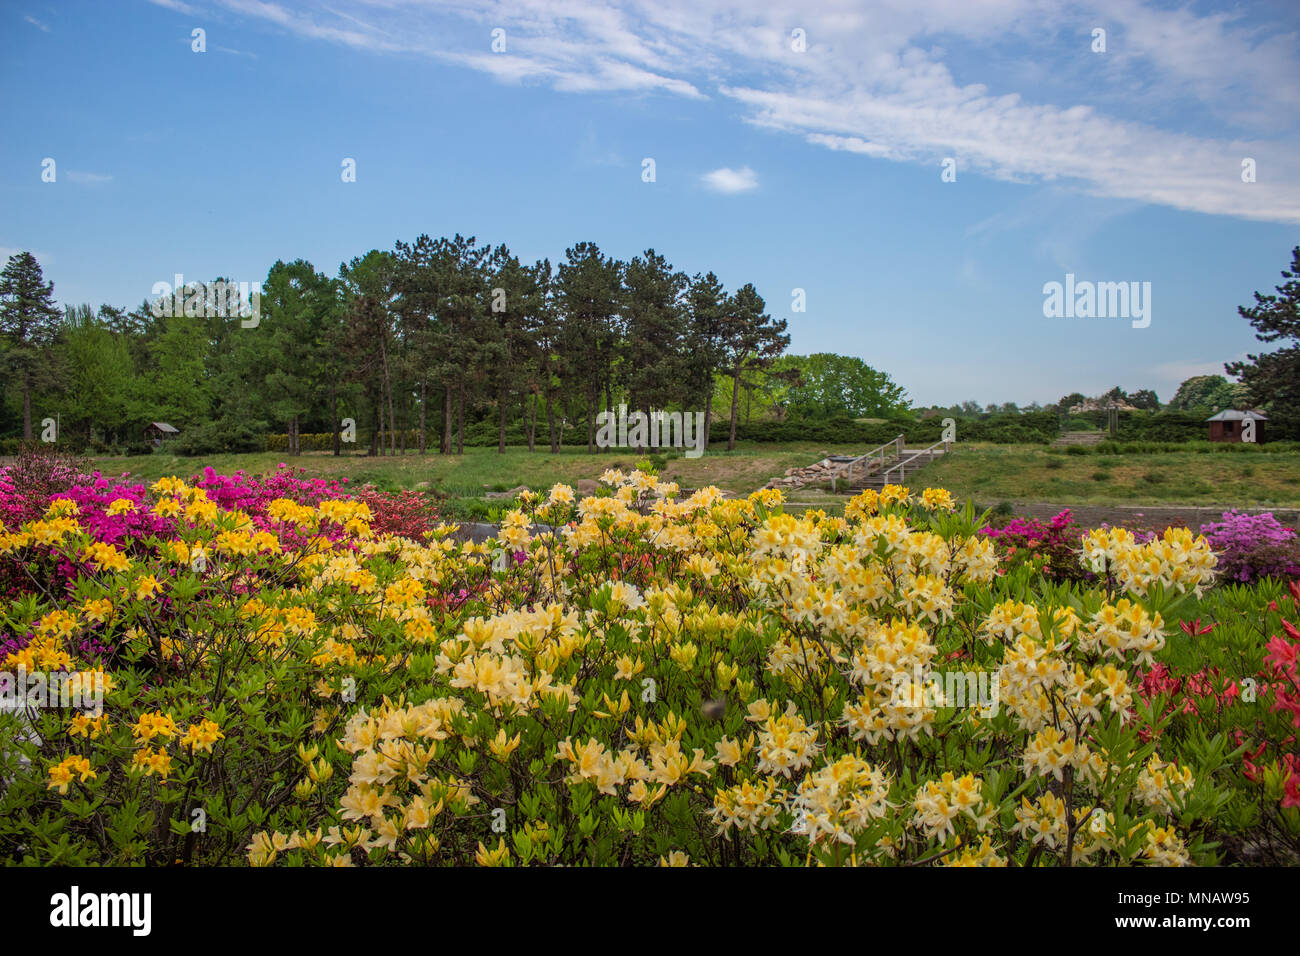 Bushes of bright colorful flowers on a background of blue sky Stock Photo